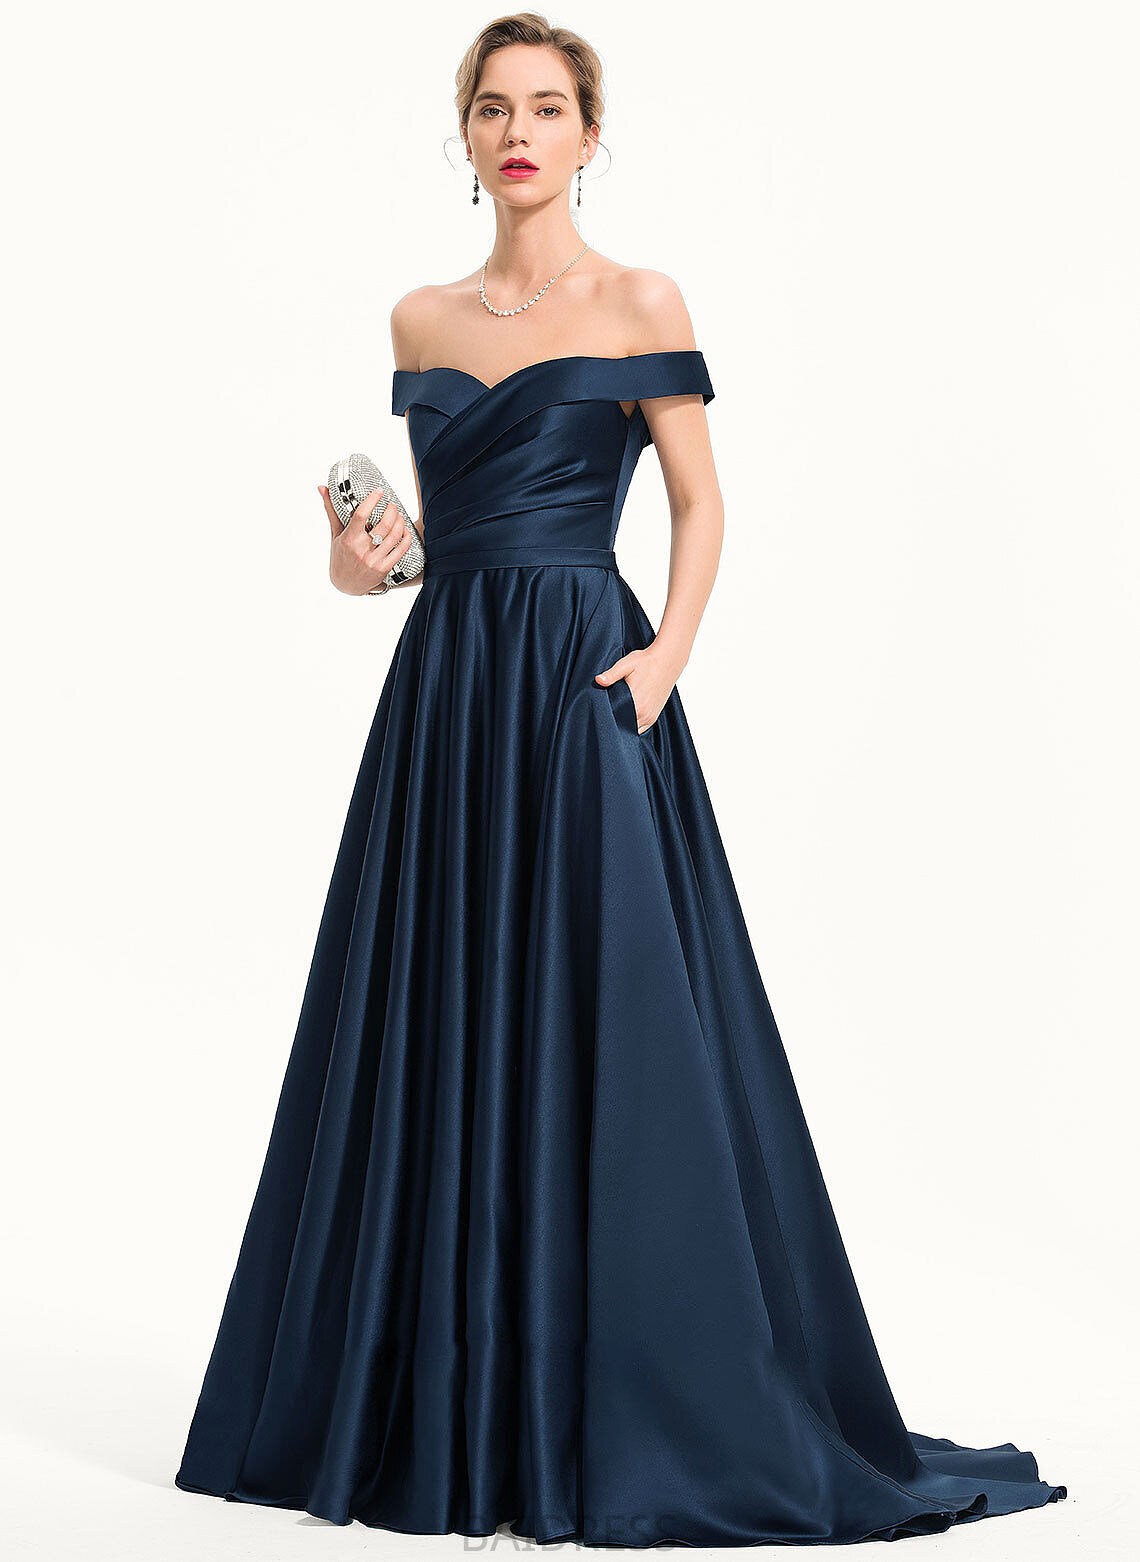 Prom Dresses Sweep A-Line Train Pockets Satin Off-the-Shoulder Diana With